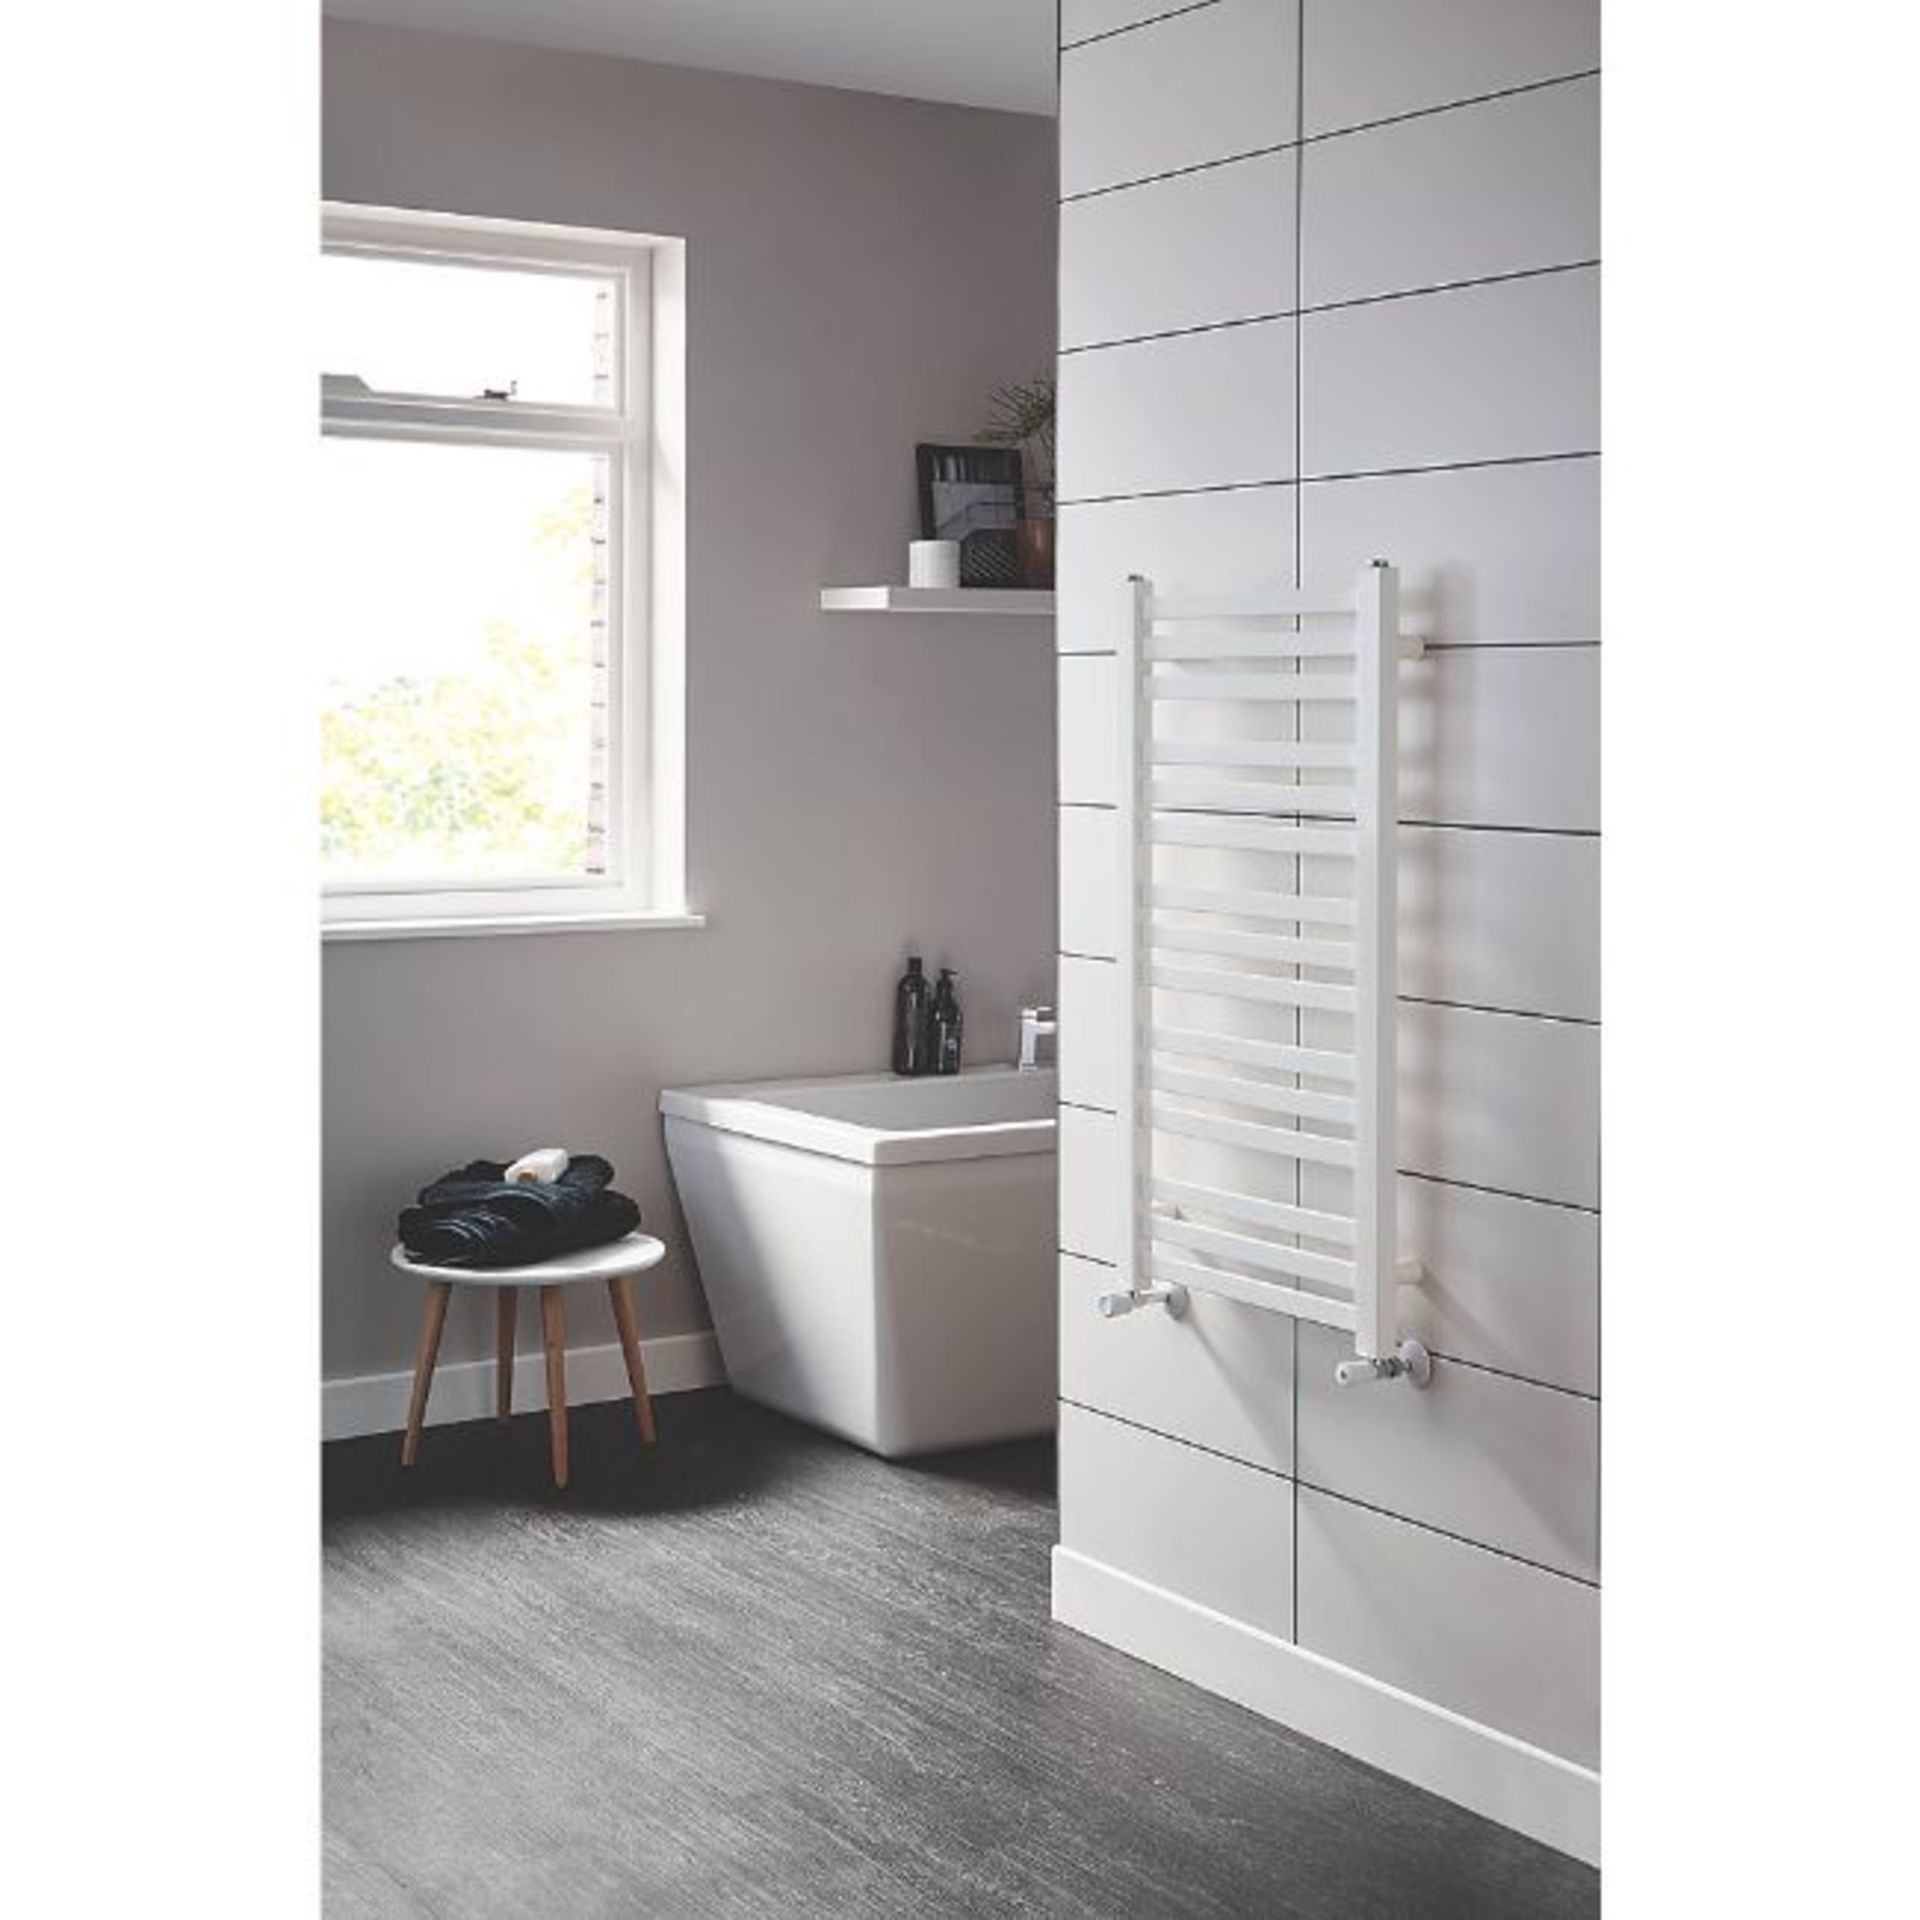 New (H33) 900x450mm Towel Radiator 900 x 500mm White. High Quality Powder-Coated Steel Con... - Image 2 of 3